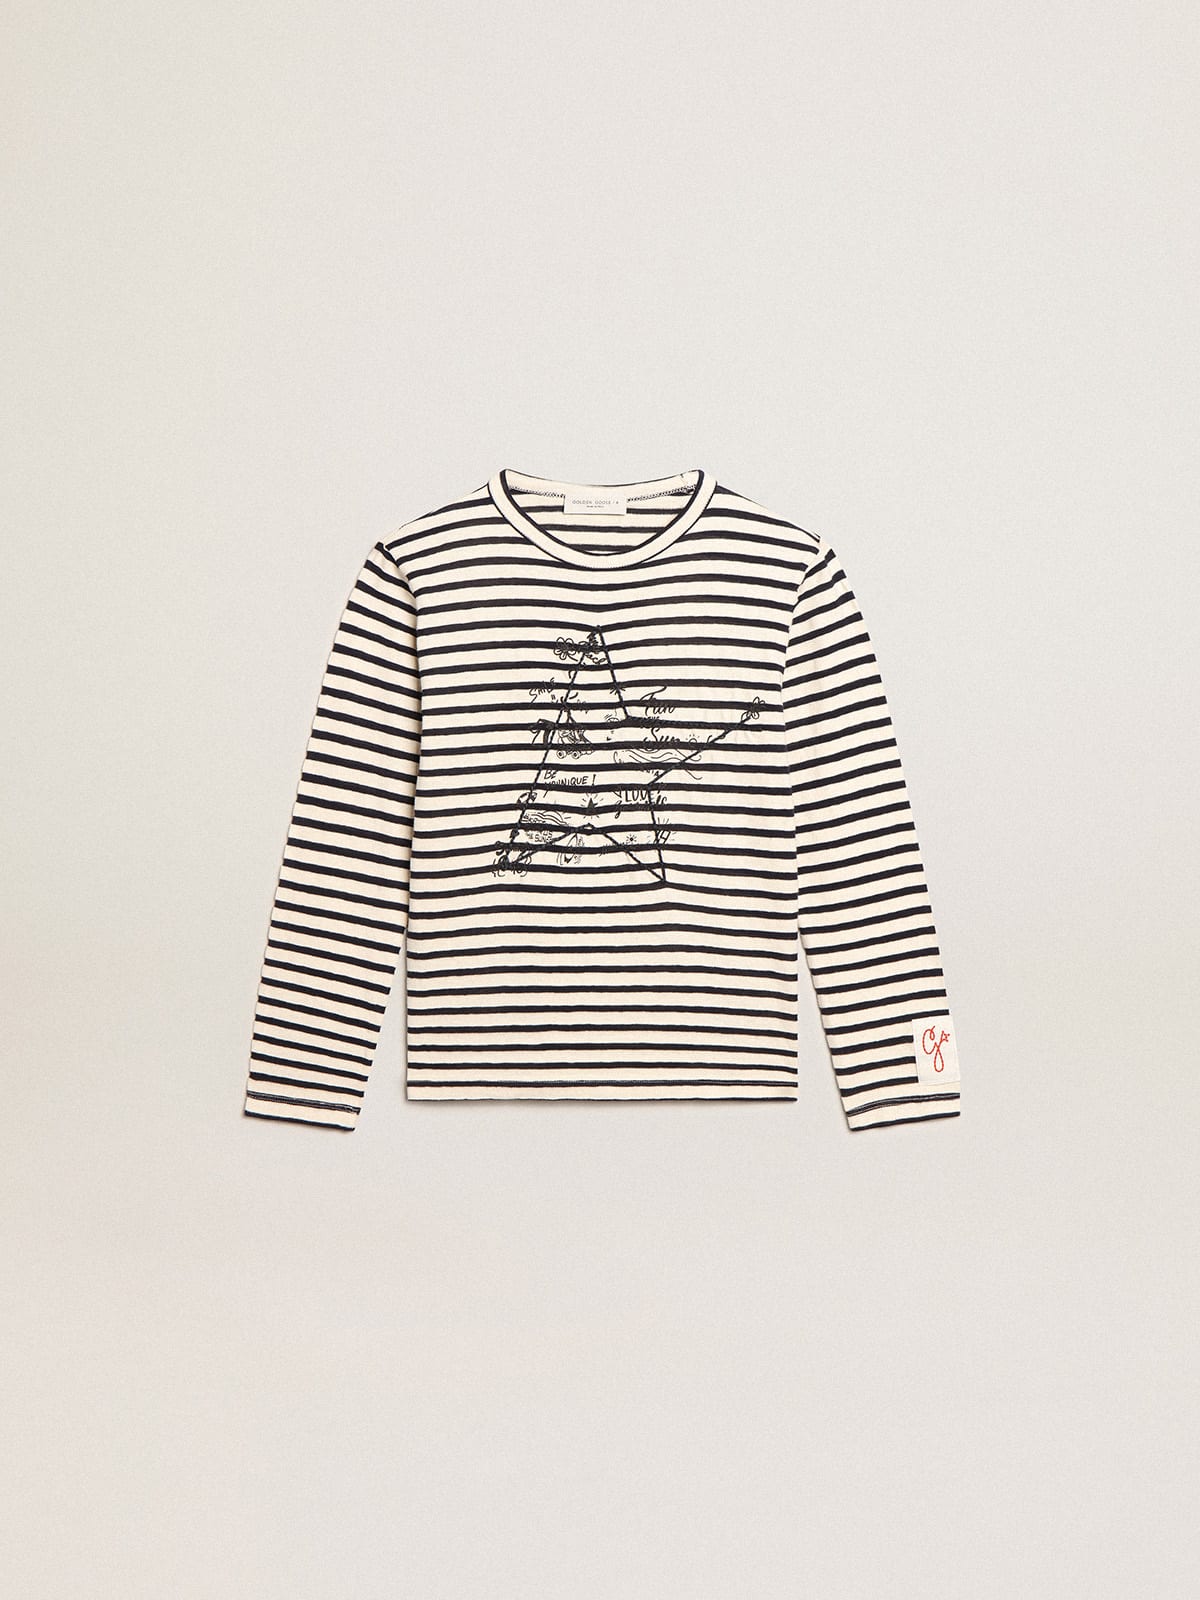 Boys' T-shirt with white and blue stripes and embroidery on the front